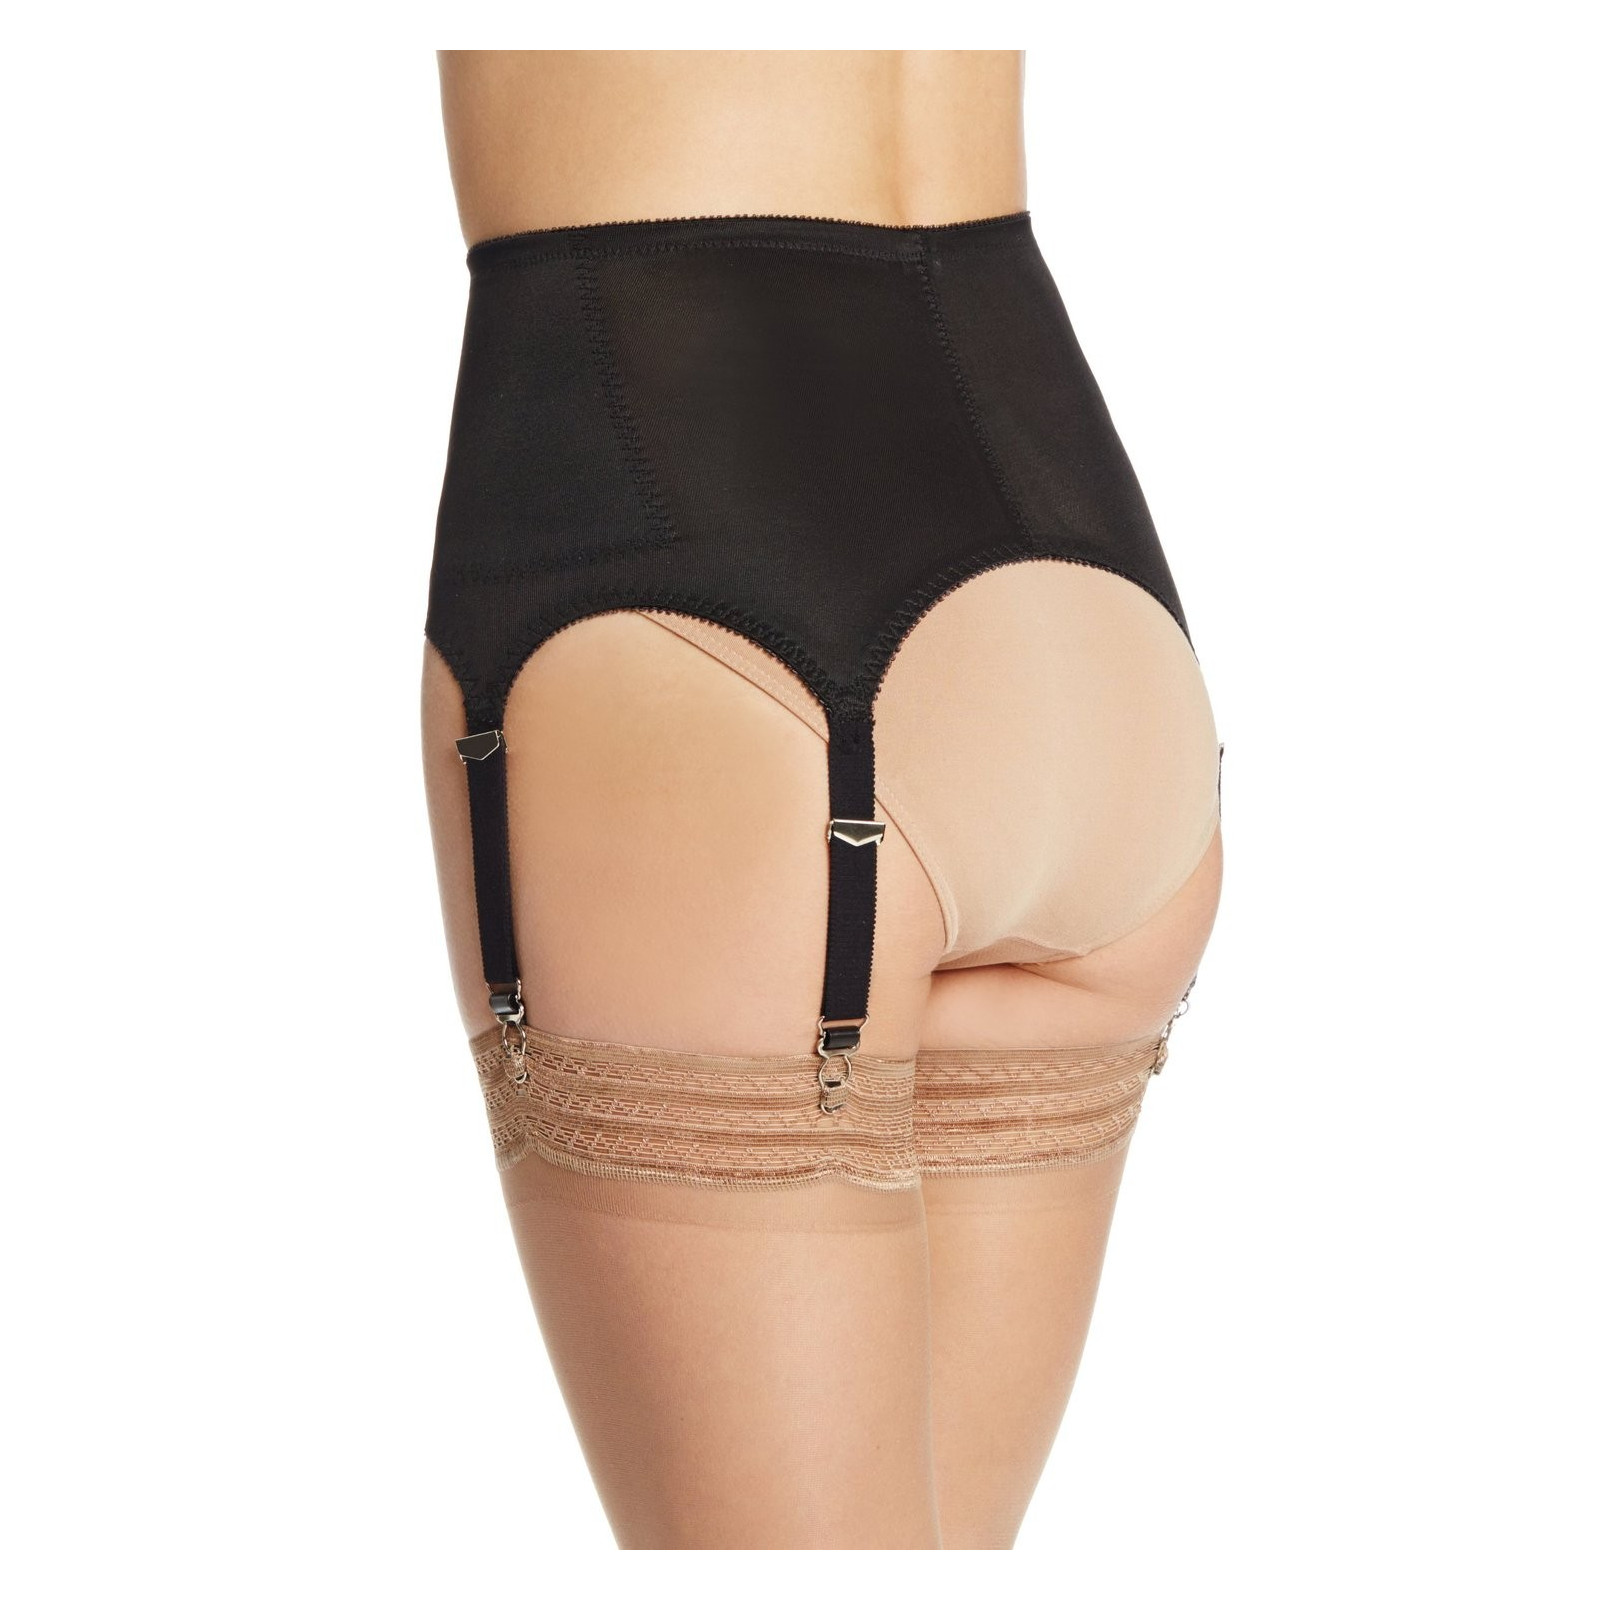 Lace Suspender Belt Six Strap - The Big Tights Company